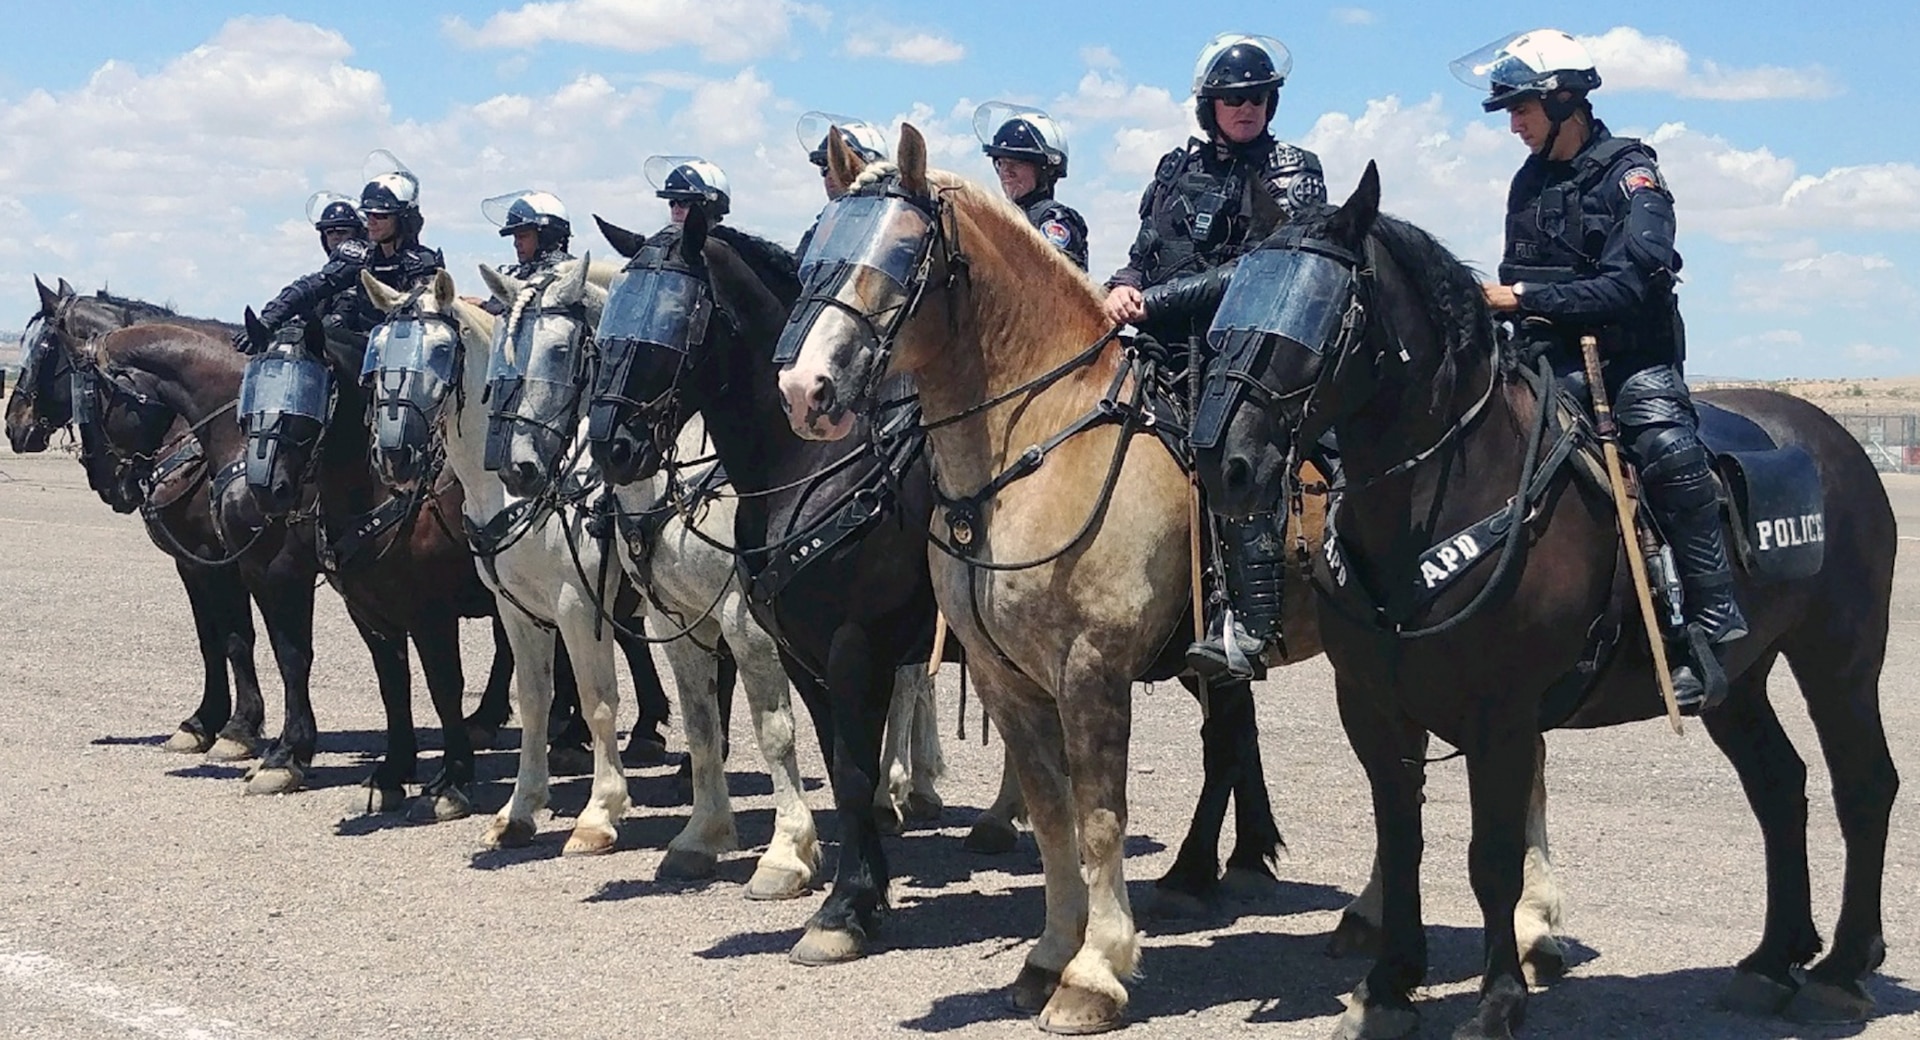 The Albuquerque Police Department’s Mounted Patrol officers prepare to participate in the Vigilant Guard exercise as part of a riot control scenario Aug. 8 in Albuquerque, N.M. The exercise was a multi-faceted exercise that comprised of several different scenarios in various location of New Mexico to provide a more realistic training.